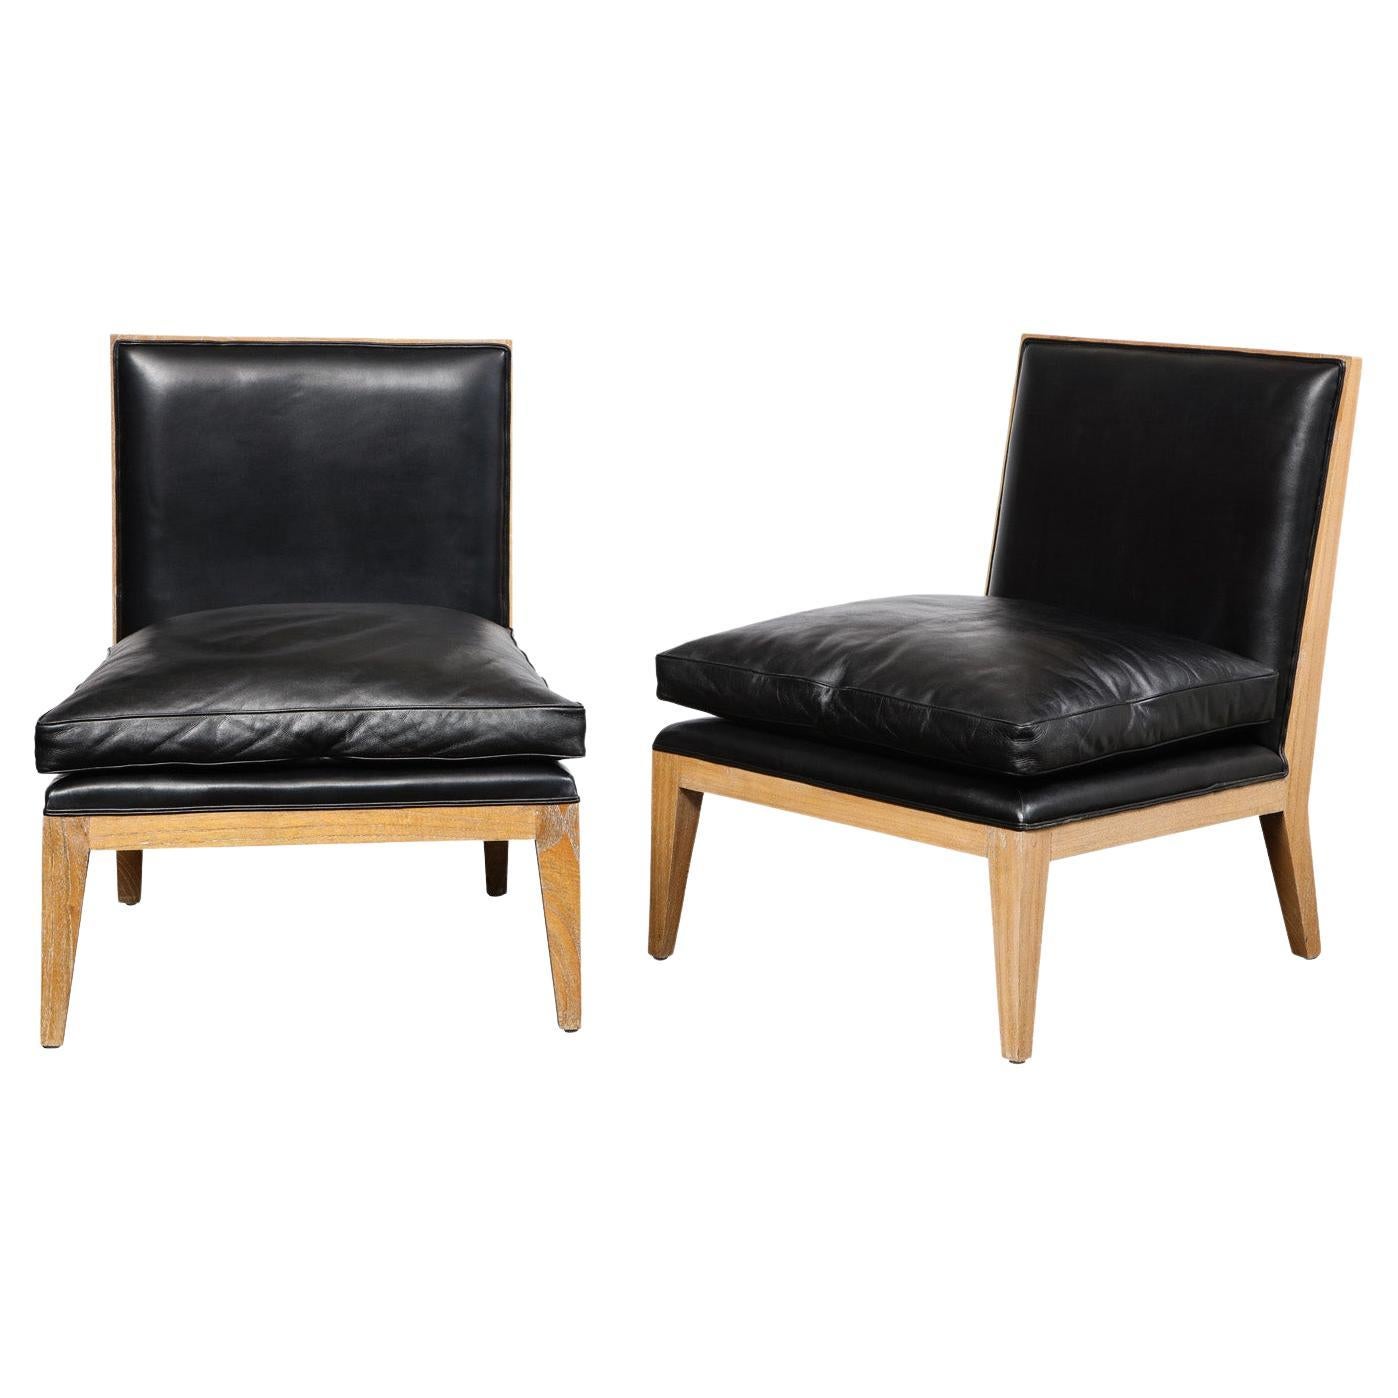 Chic French Pair of Cerused Oak Slipper Chairs with Black Leather 1960s